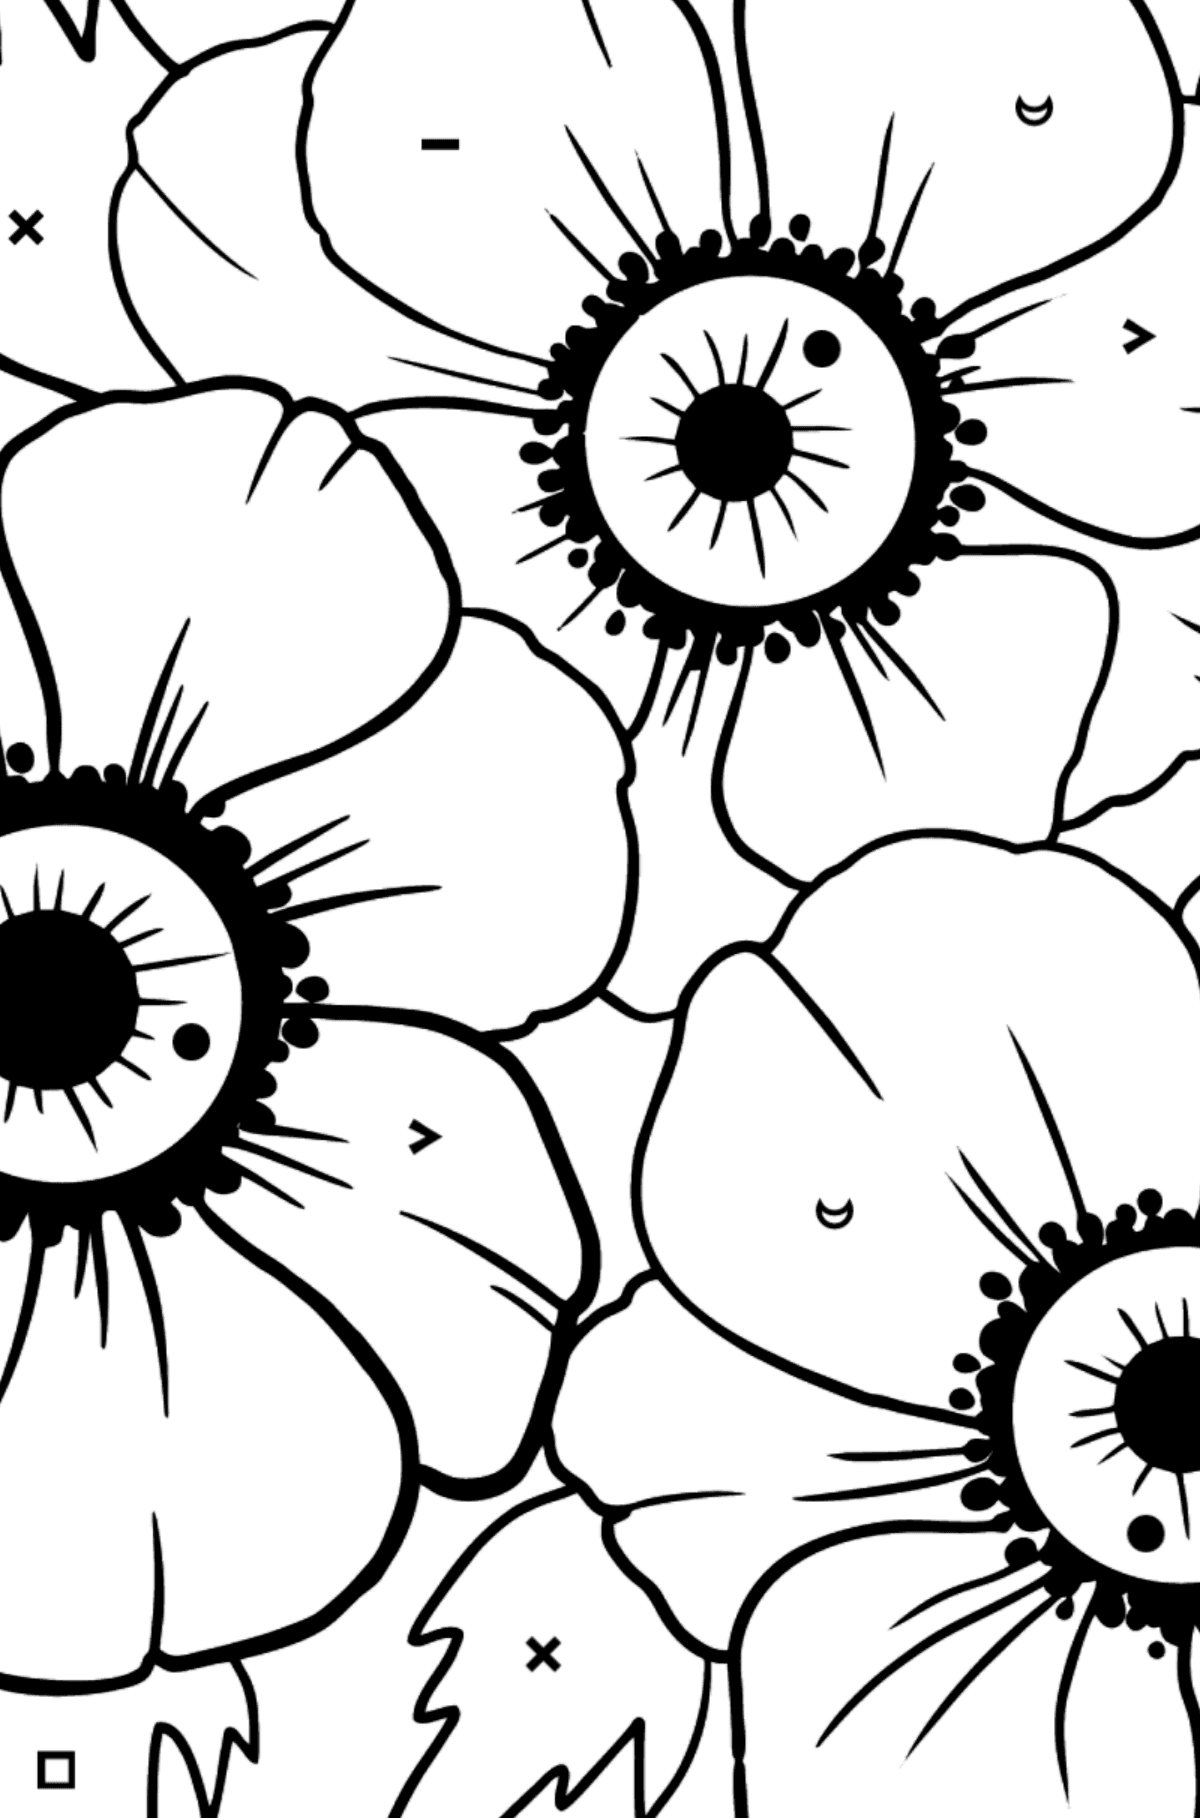 Coloring Page Anemone Mr. Fokker - Coloring by Symbols for Kids